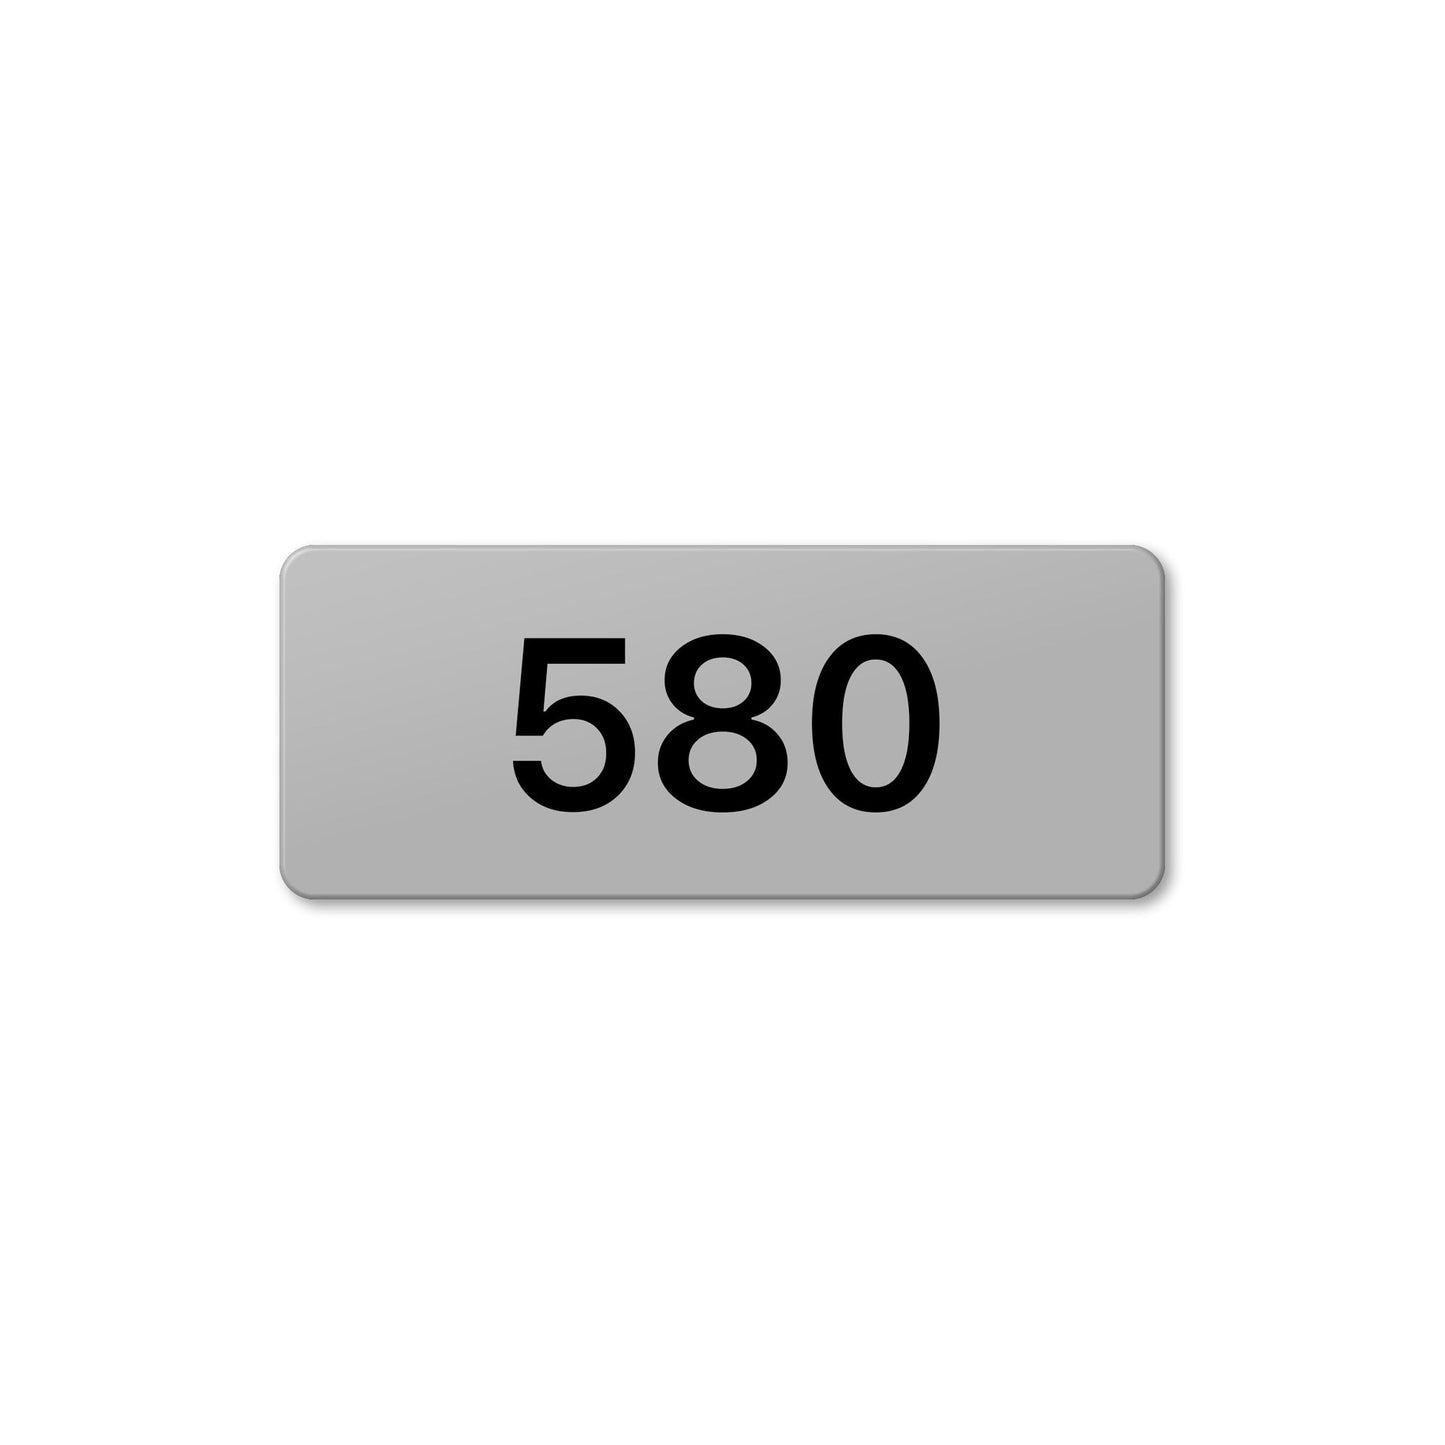 Numeral 580